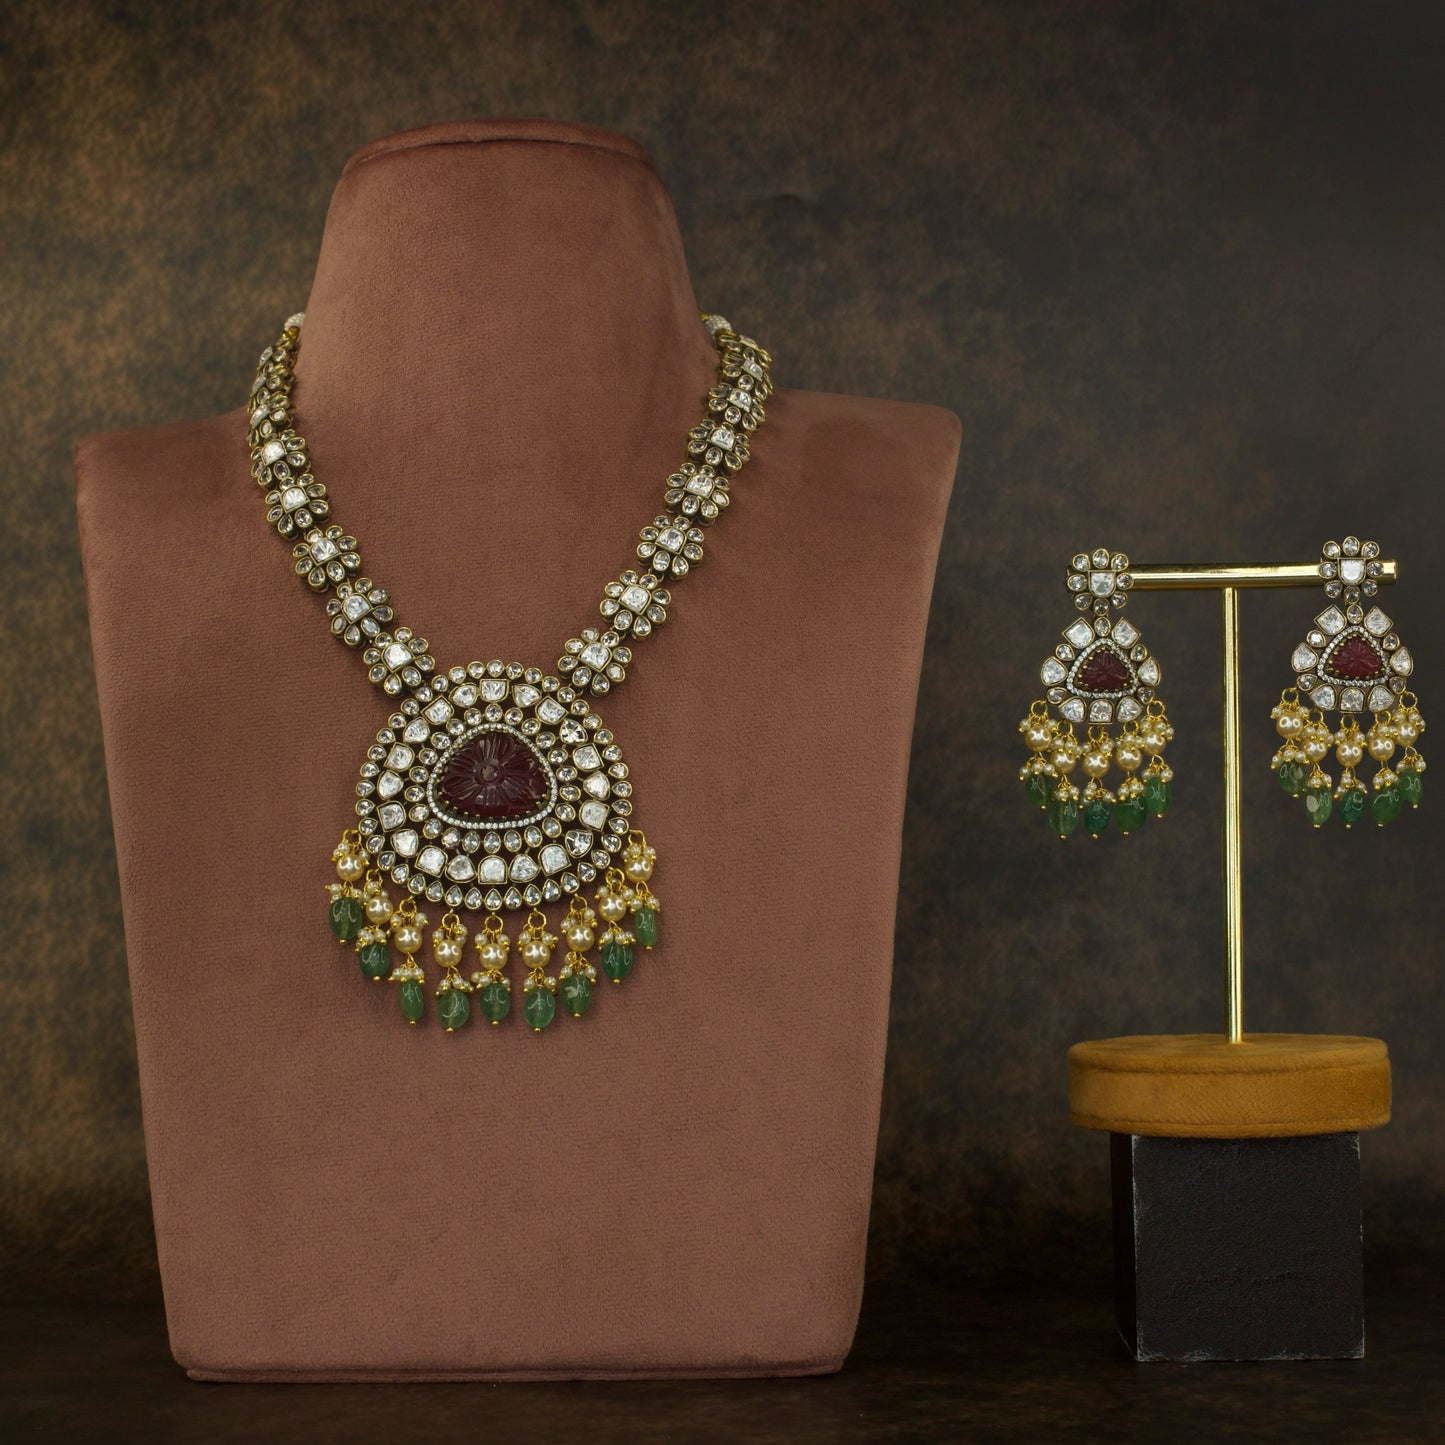 Handcrafted Victorian Necklace Set with Carving stones with High Quality Victorian finish. This product belongs to Victorian jewellery category